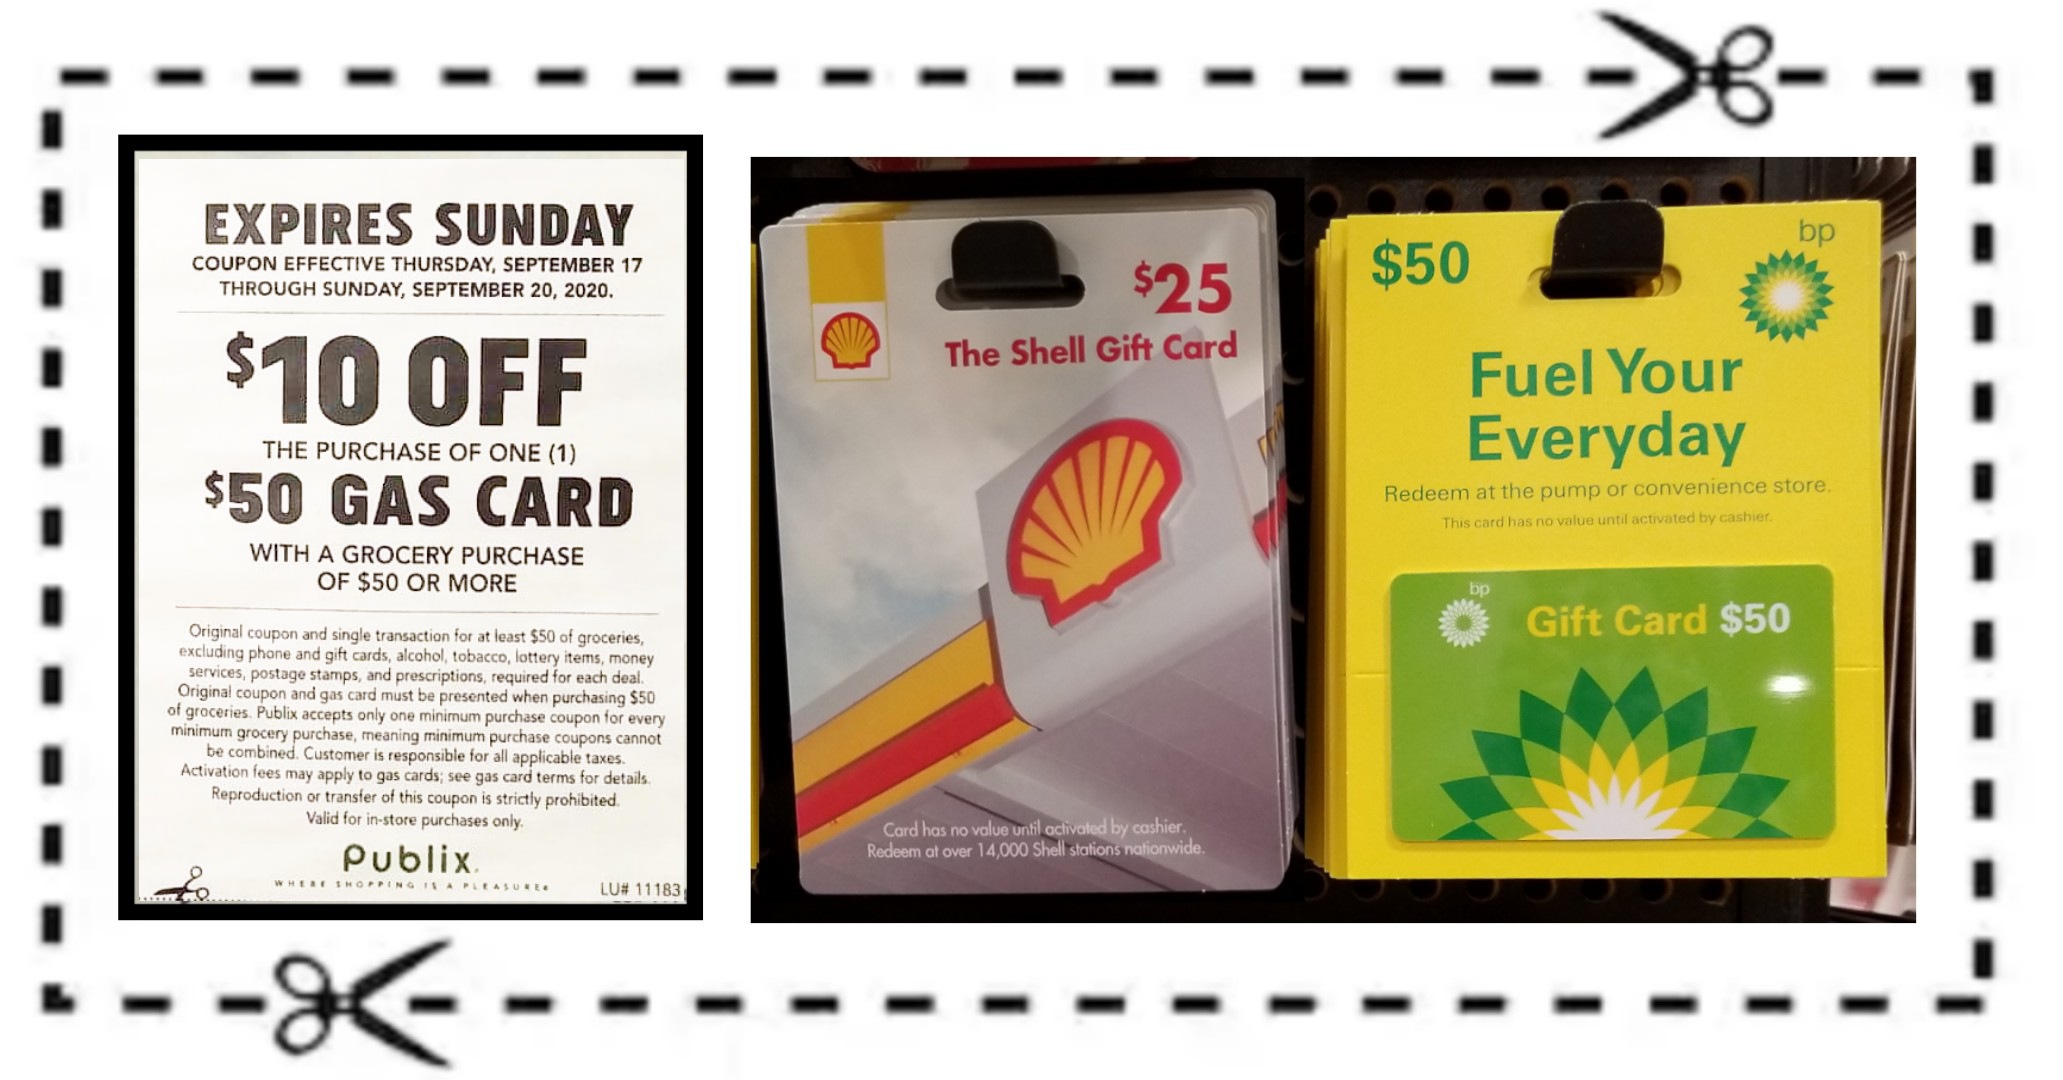 gas-card-10-00-off-1-50-00-gas-card-valid-9-16-9-20-or-9-17-9